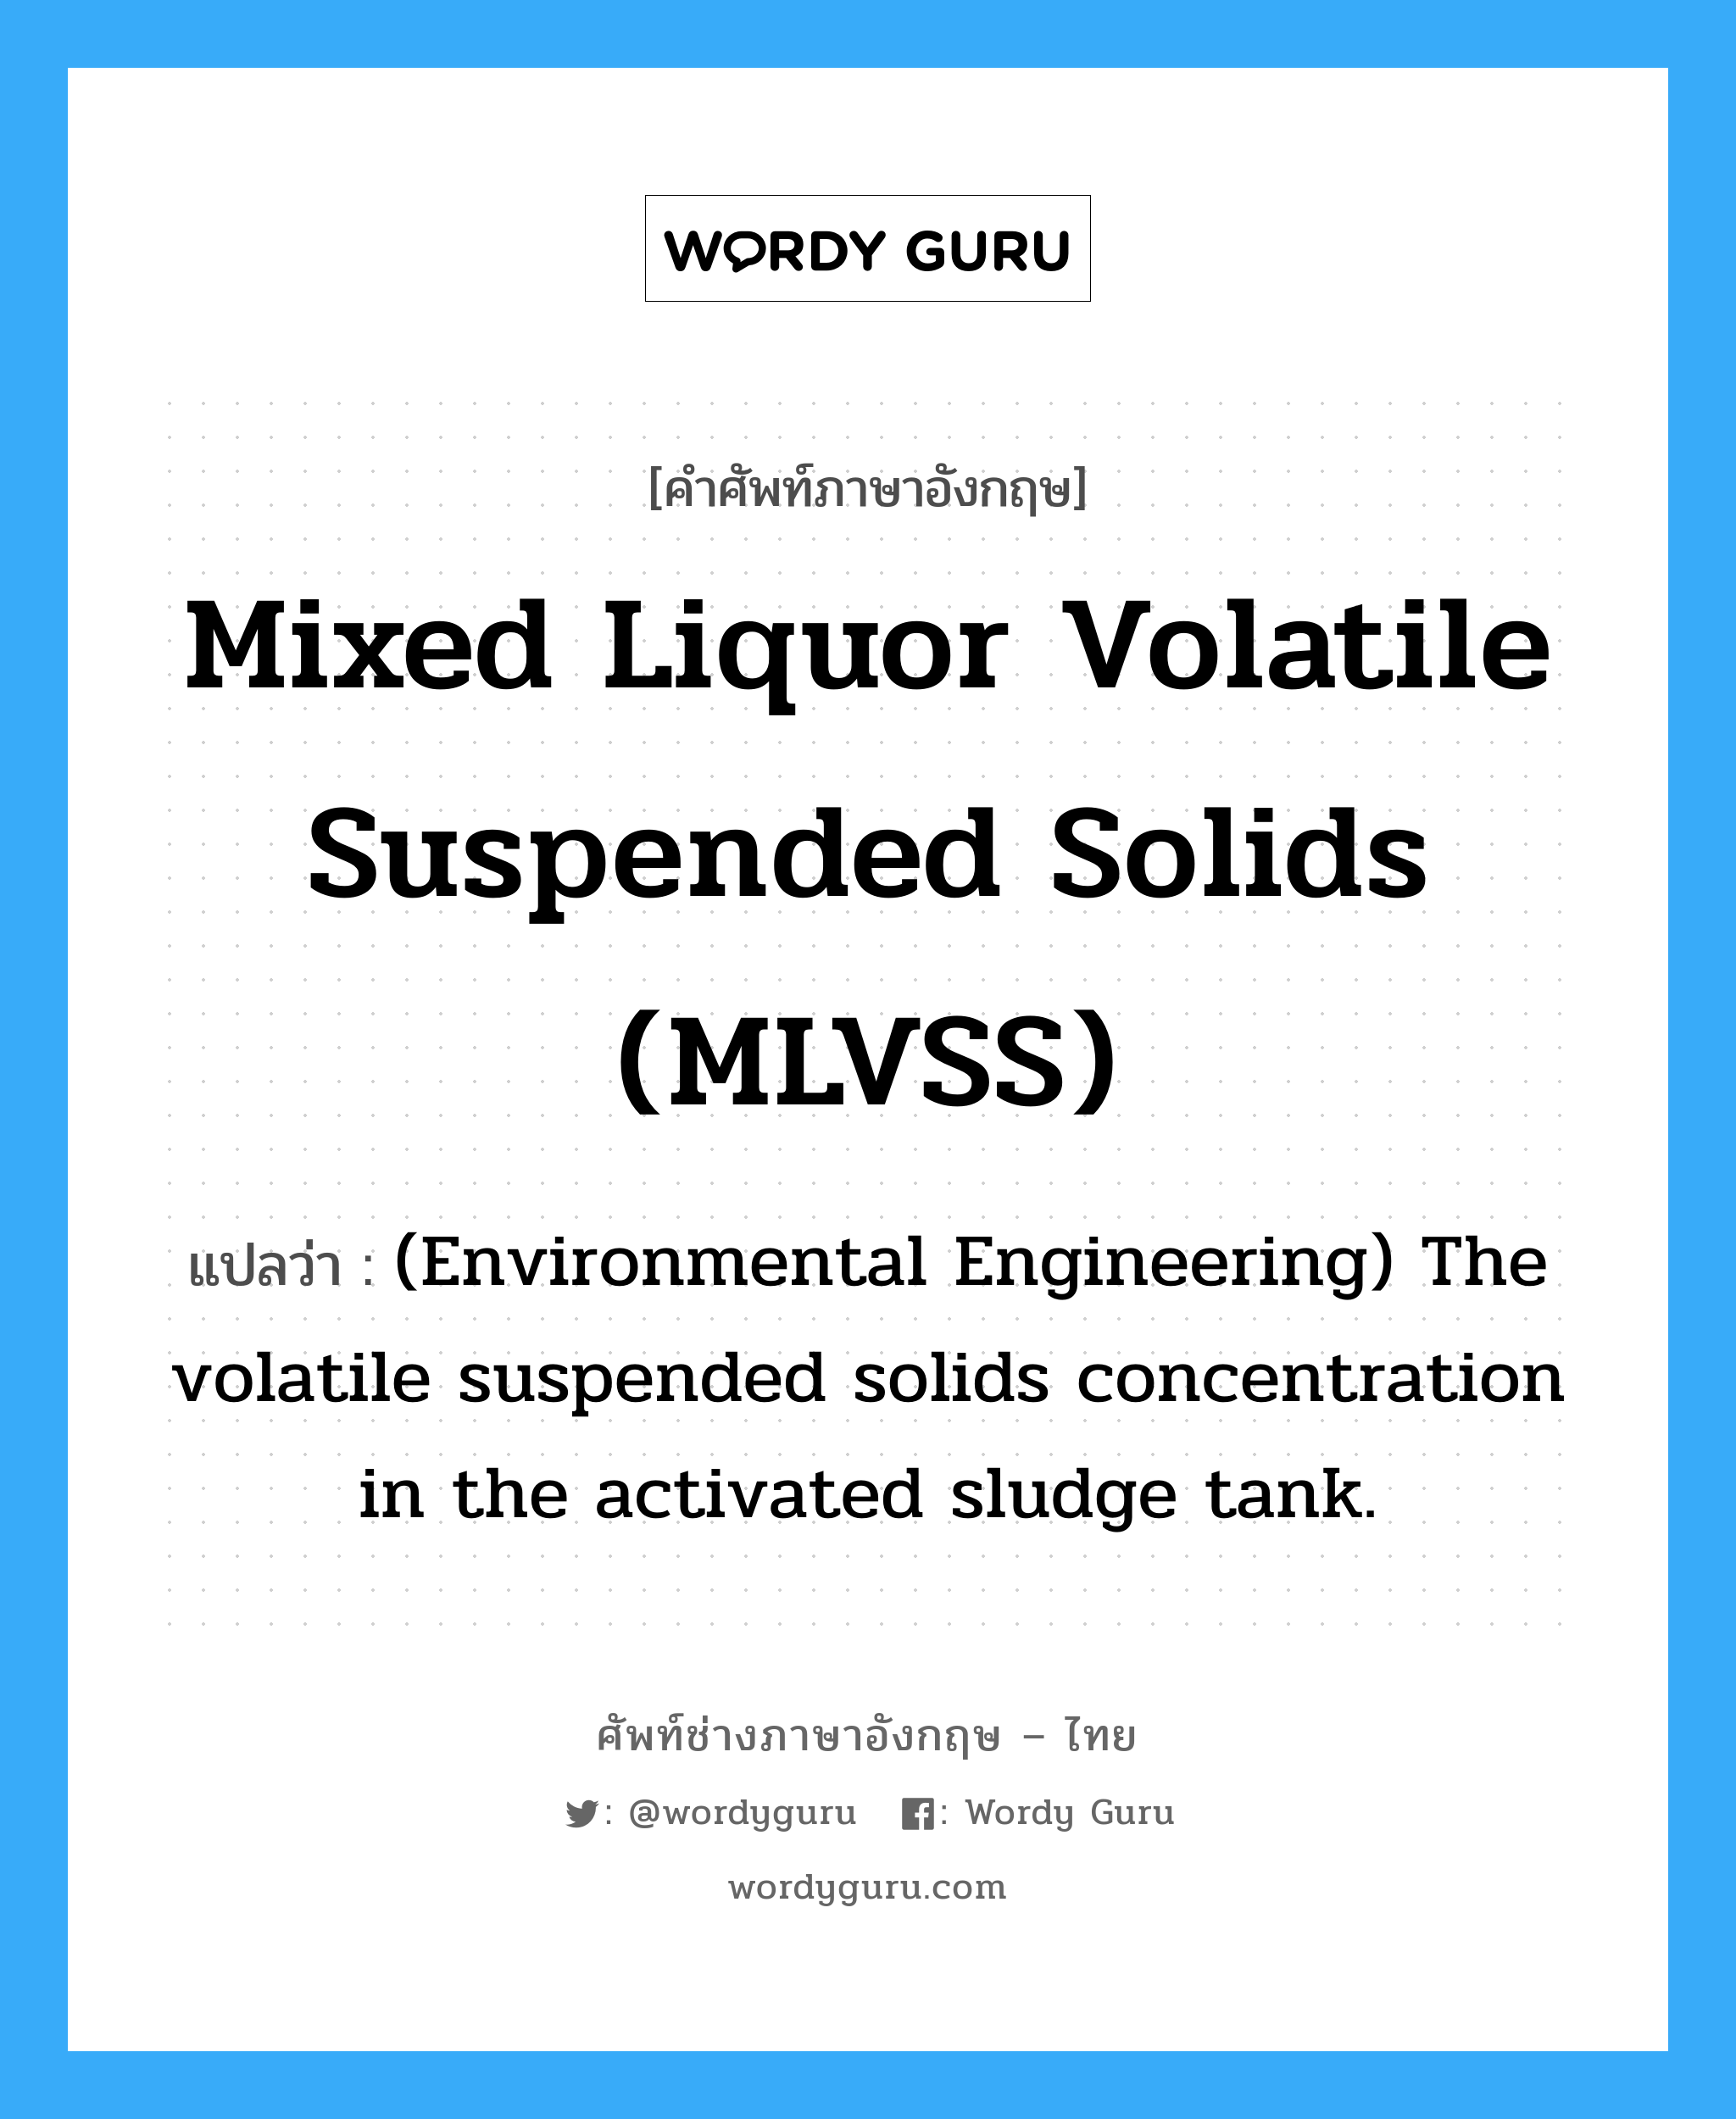 (Environmental Engineering) The volatile suspended solids concentration in the activated sludge tank. ภาษาอังกฤษ?, คำศัพท์ช่างภาษาอังกฤษ - ไทย (Environmental Engineering) The volatile suspended solids concentration in the activated sludge tank. คำศัพท์ภาษาอังกฤษ (Environmental Engineering) The volatile suspended solids concentration in the activated sludge tank. แปลว่า Mixed liquor volatile suspended solids (MLVSS)